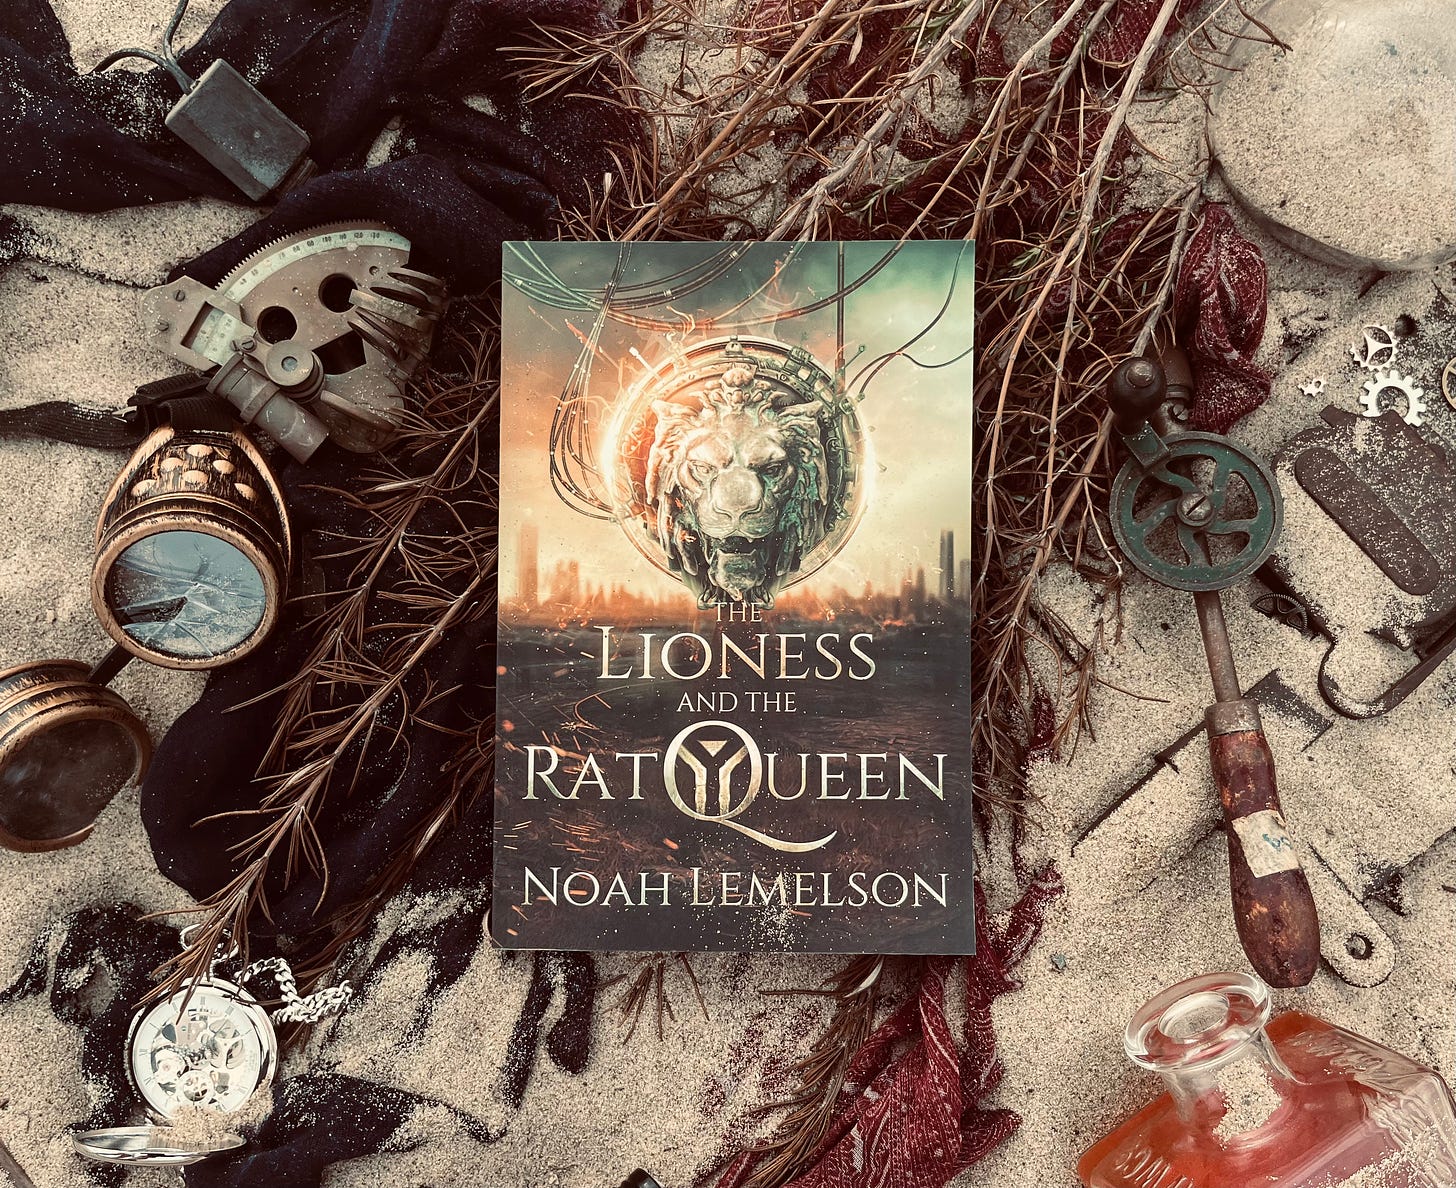 The book The Lioness and The Rat Queen framed by scrap on a sandy background